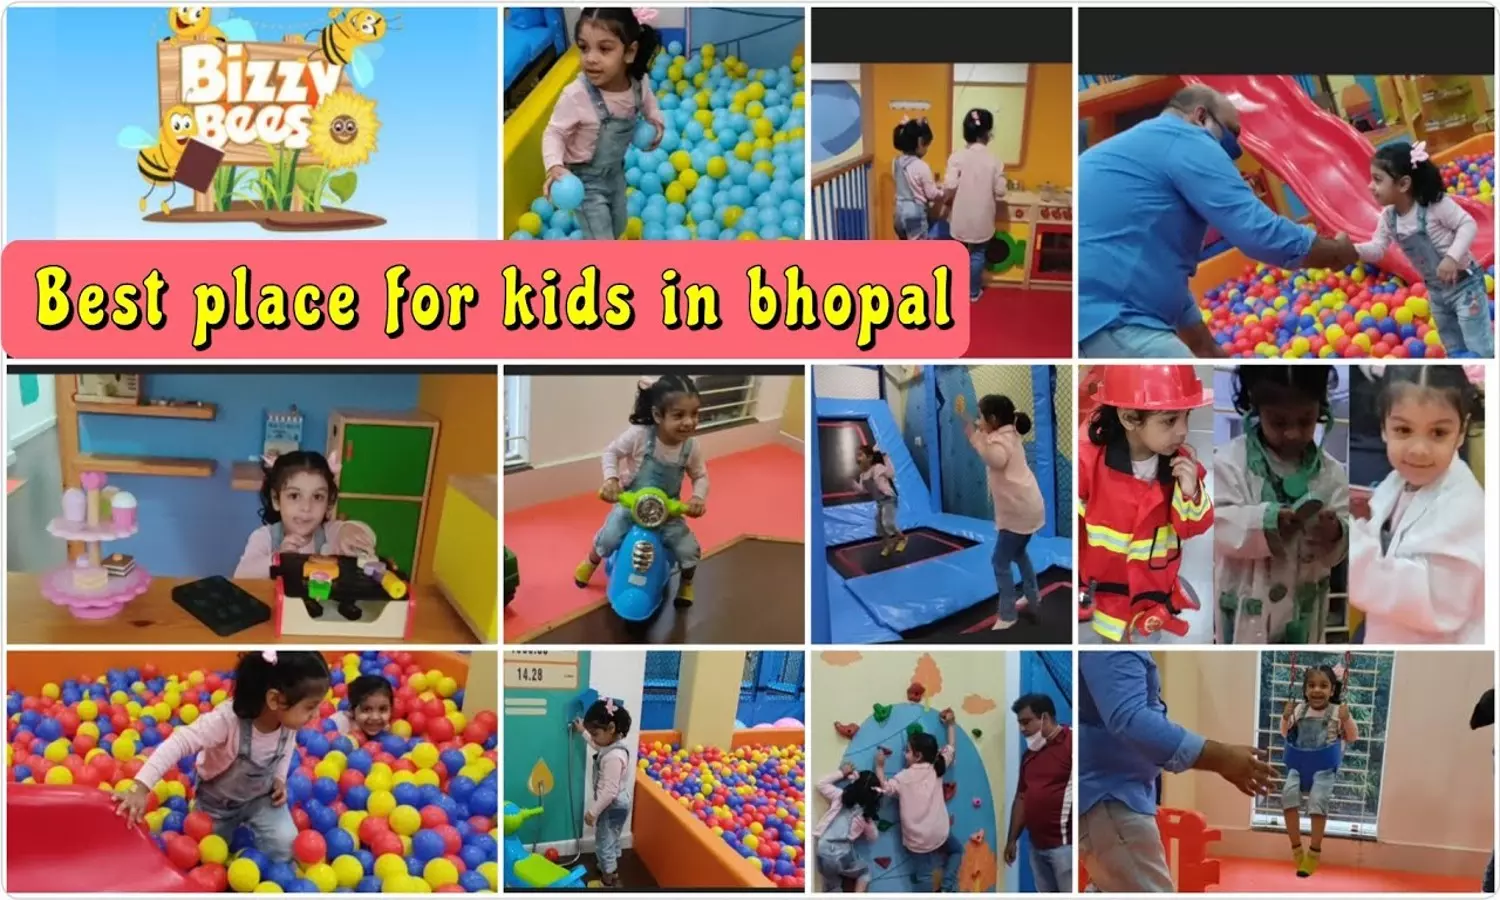 Best Place for kids in Bhopal